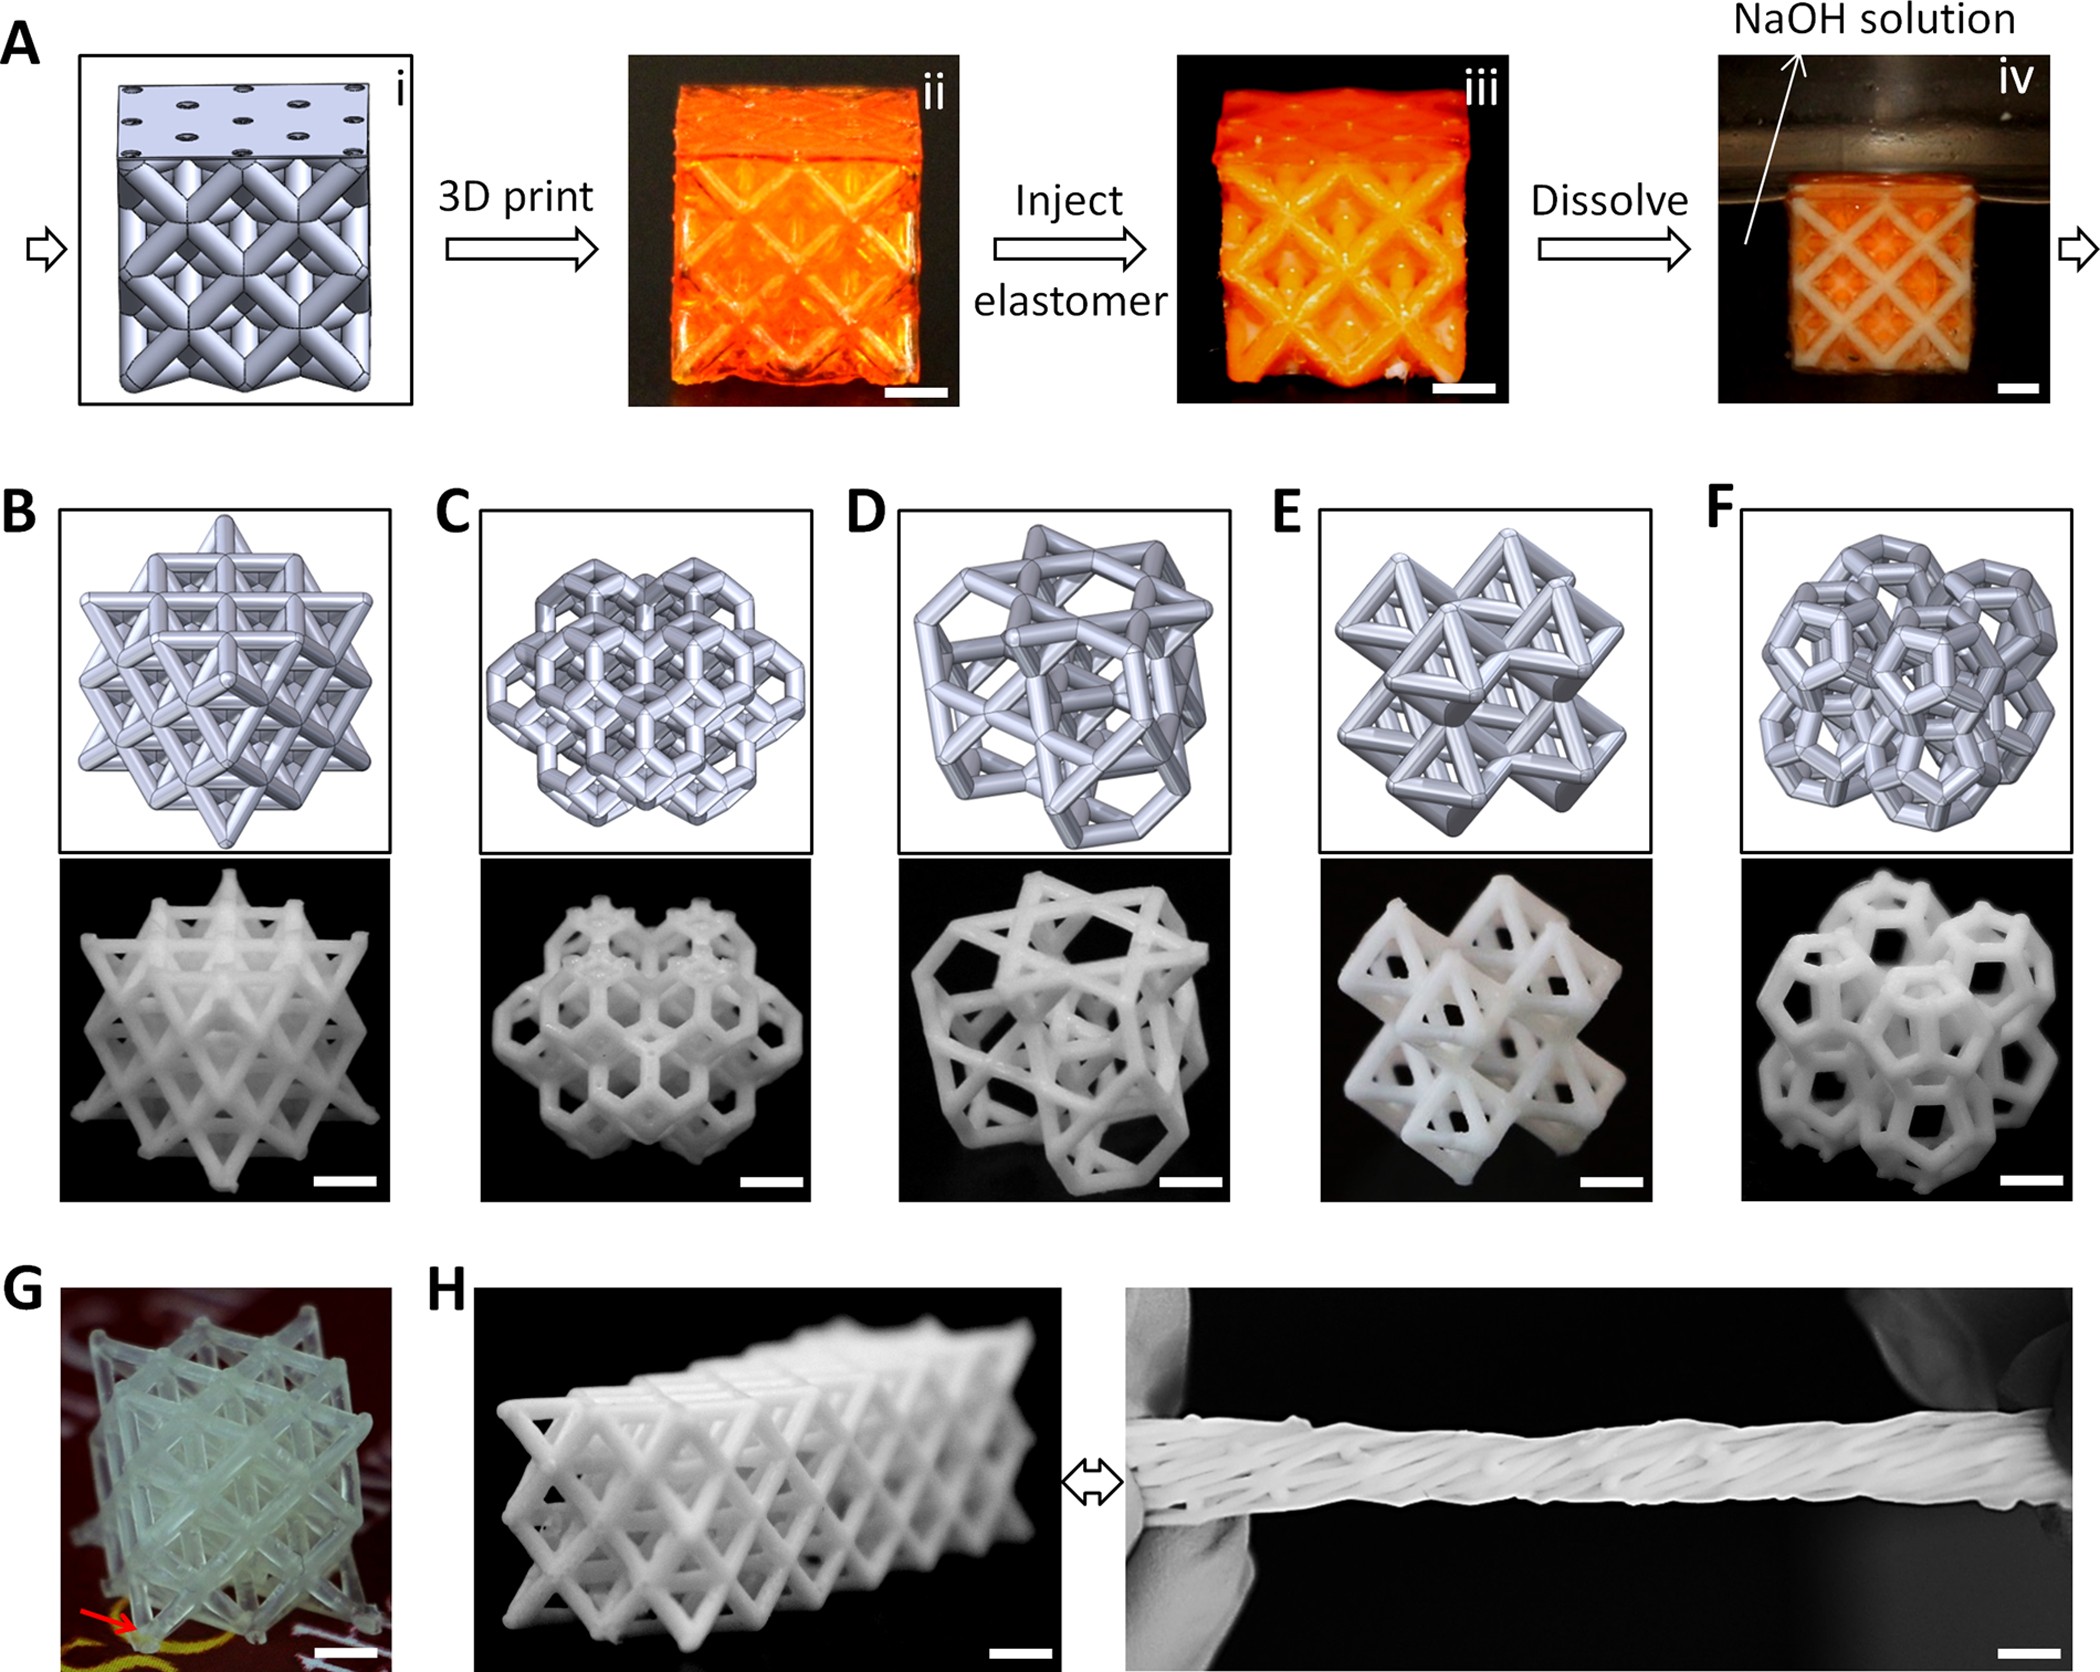 Energy Absorption Properties of Two 3D-Printed Lattice Structures